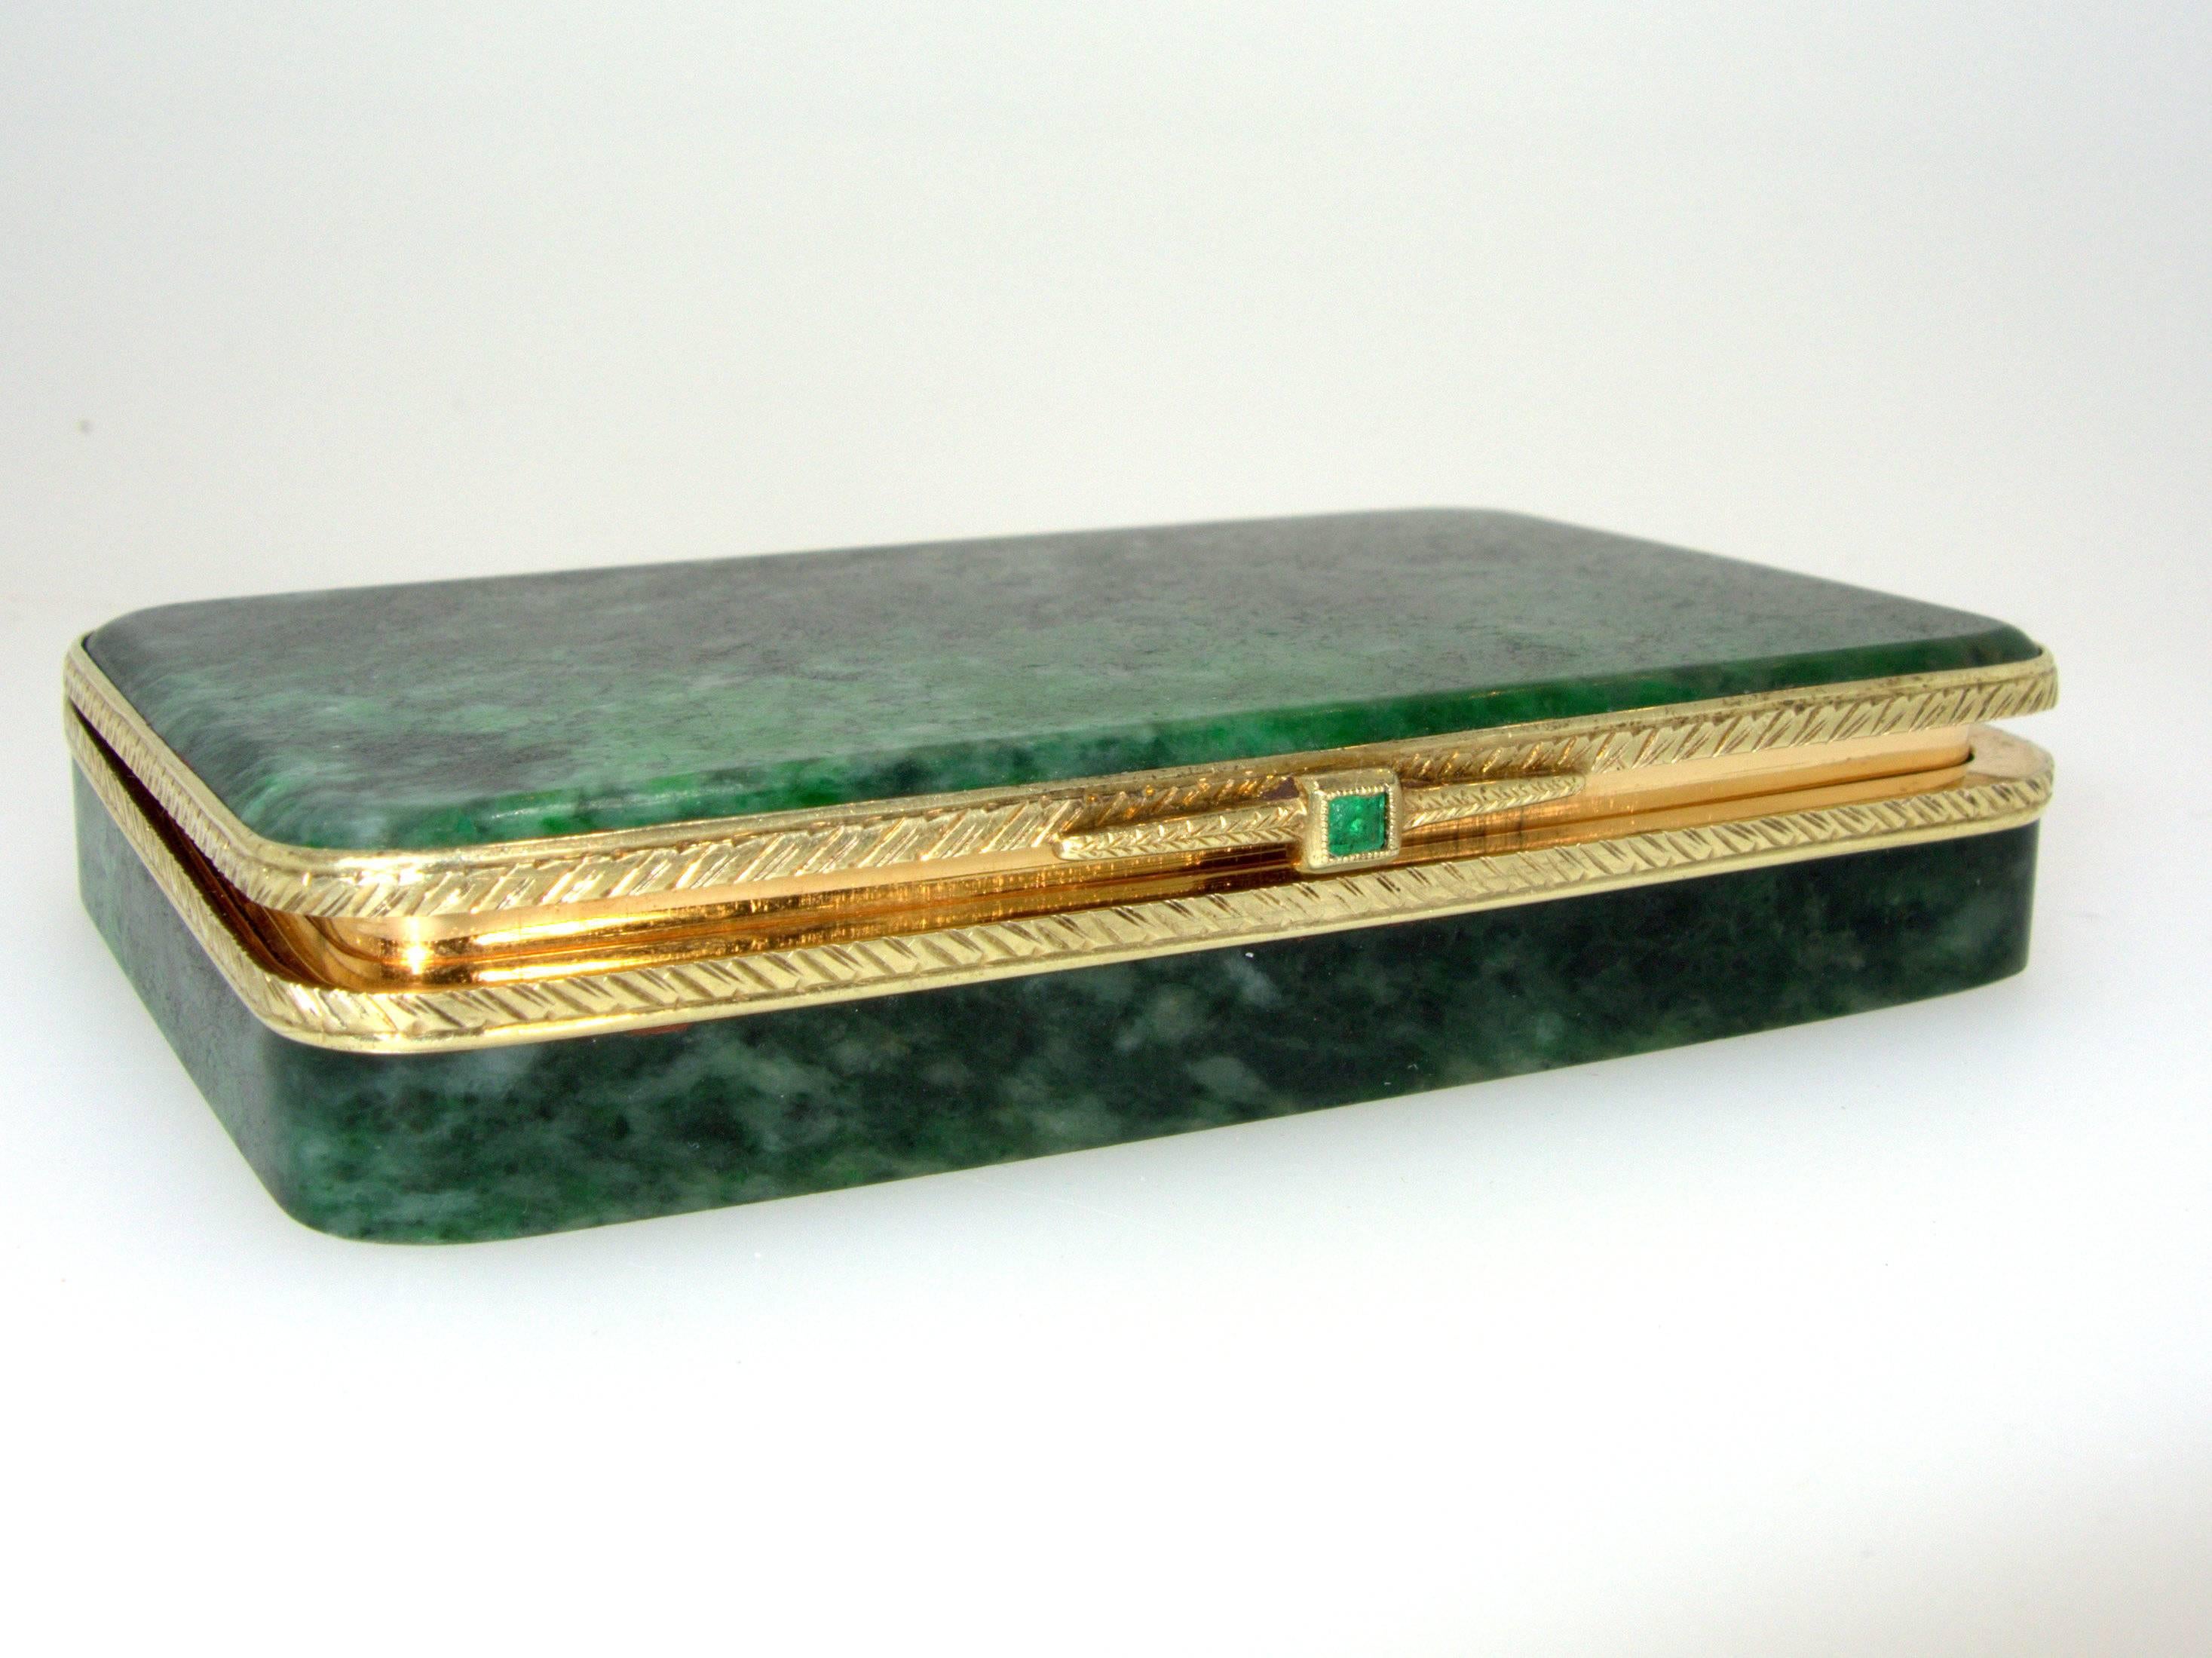 This gold box opens and closes with remarkable precision.  The jadeite has been tested and found to be type 